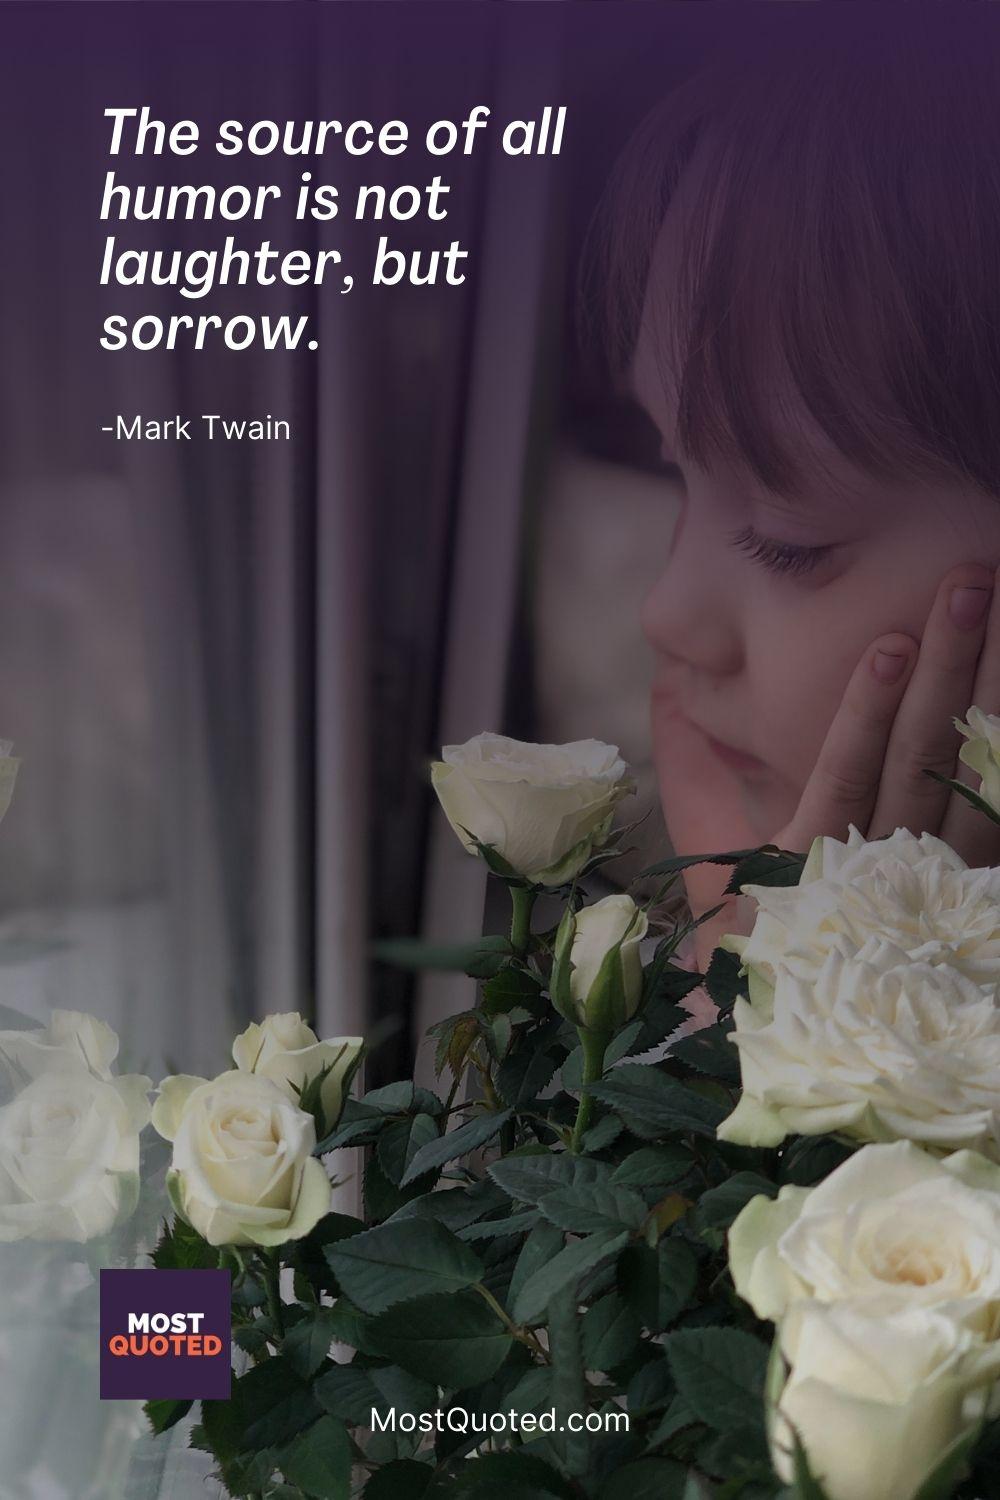 The source of all humor is not laughter, but sorrow. - Mark Twain